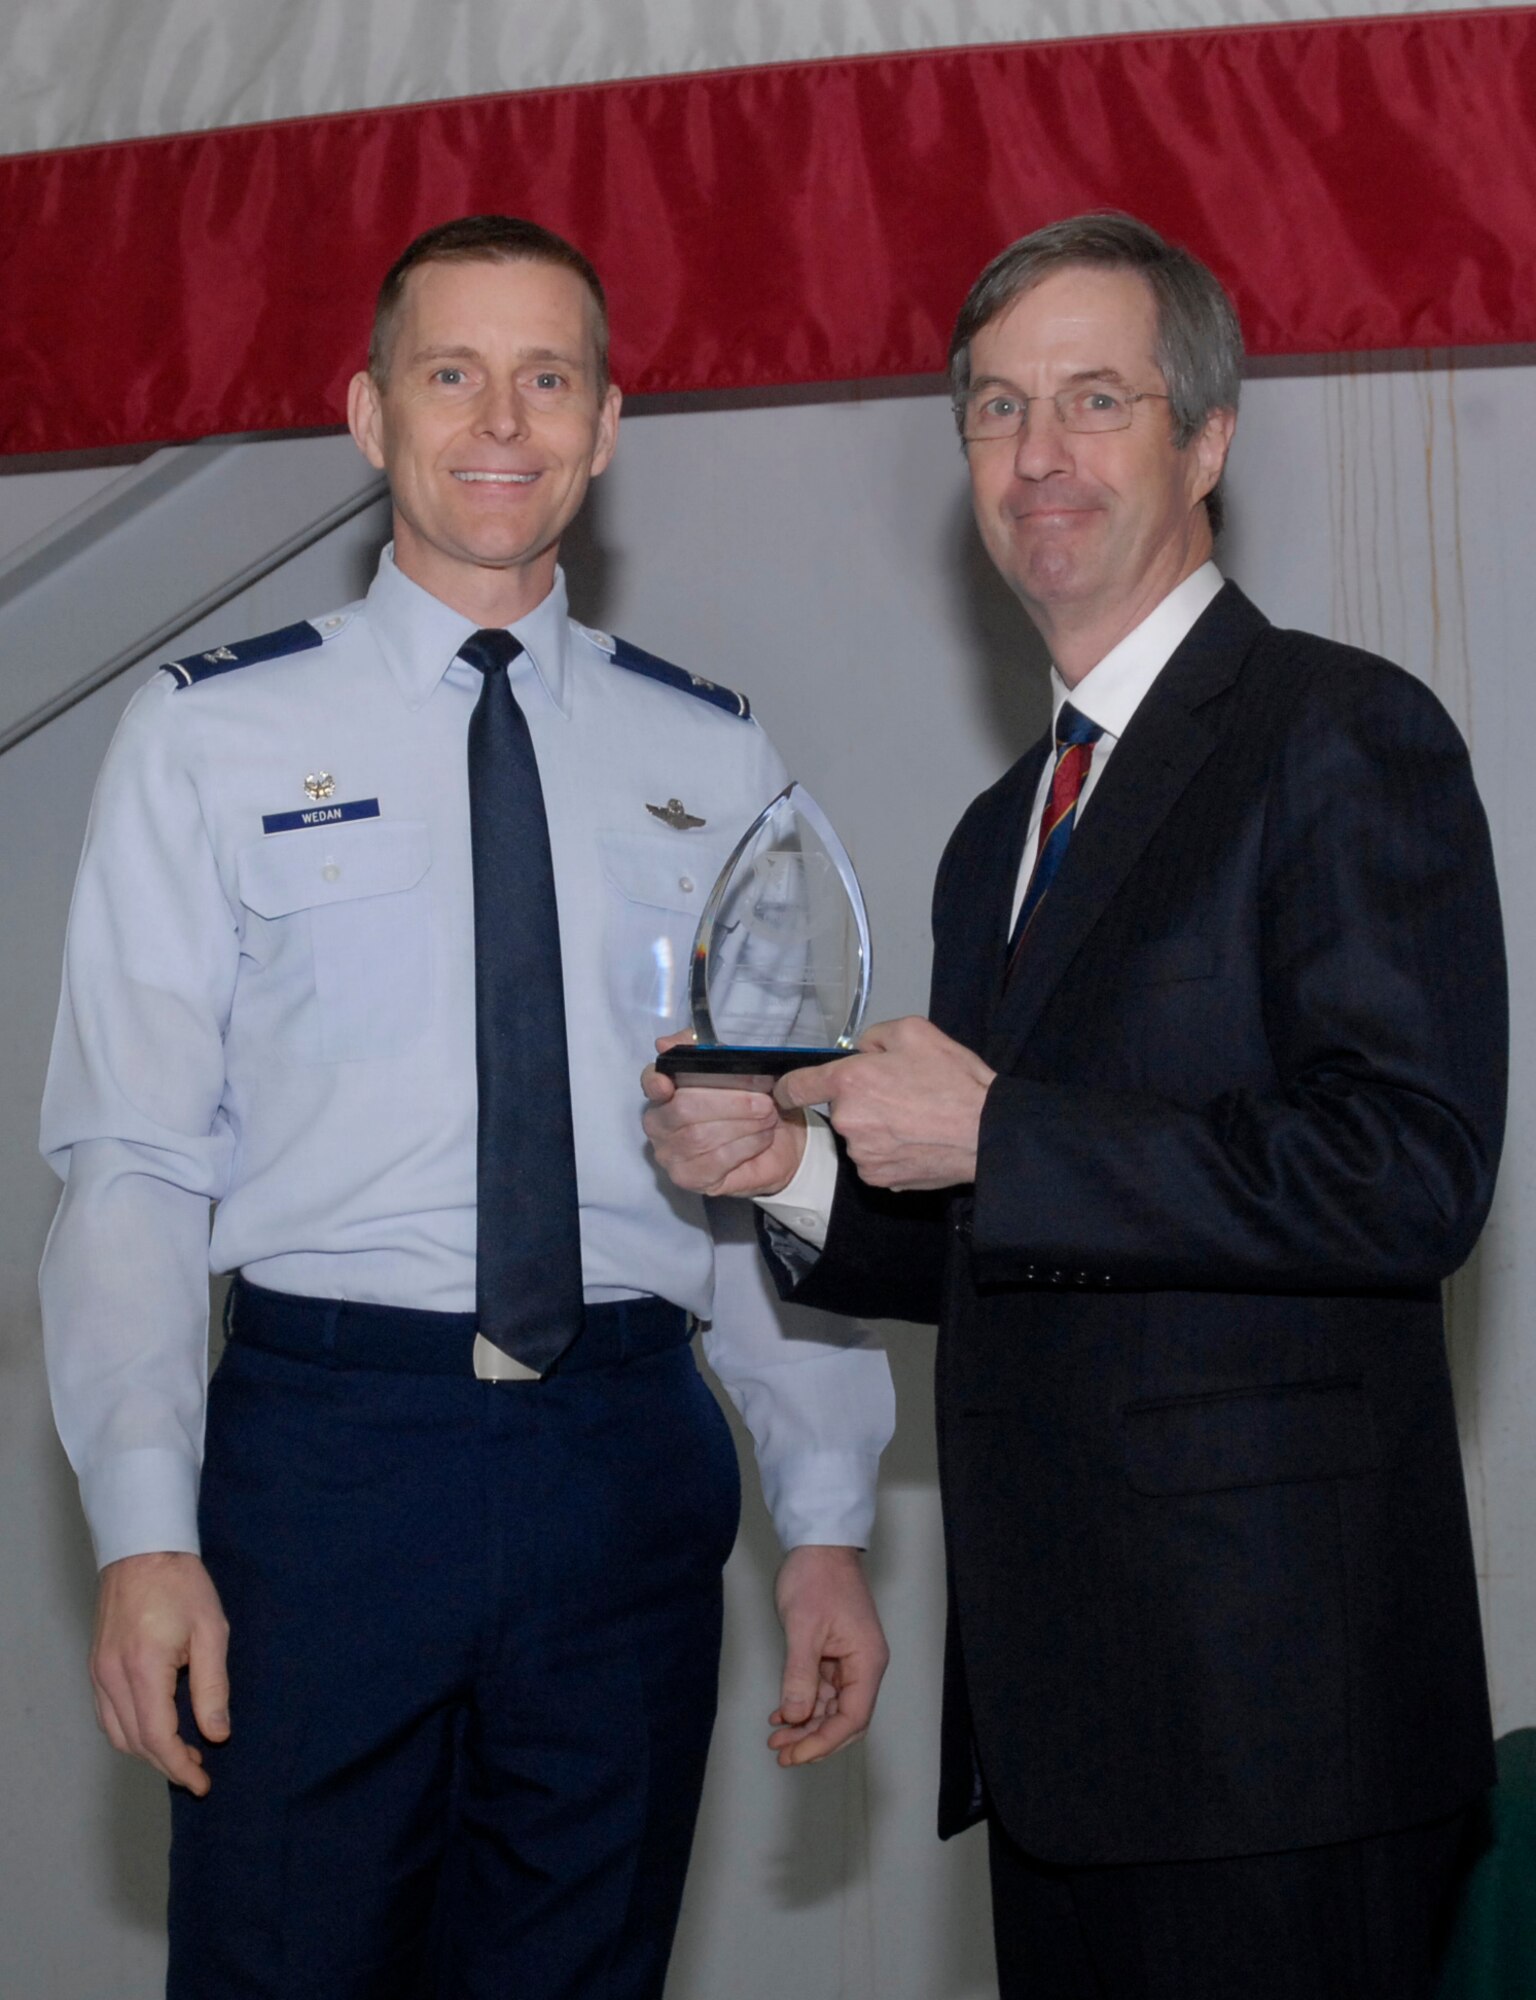 Oregon Air National Guard Col. Rick Wedan, 142nd Fighter Wing Commander and Mr. Bill Wyatt Executive Director for the Port of Portland, pause for a photograph with the Award for Oregon Air National Guard Employer of the Year 2013, during the ceremony to honor the Port of Portland, held at the Portland Air National Guard Base, Ore., Feb. 20, 2014. (Air National Guard photo by Tech. Sgt. John Hughel, 142nd Fighter Wing Public Affairs/Released)